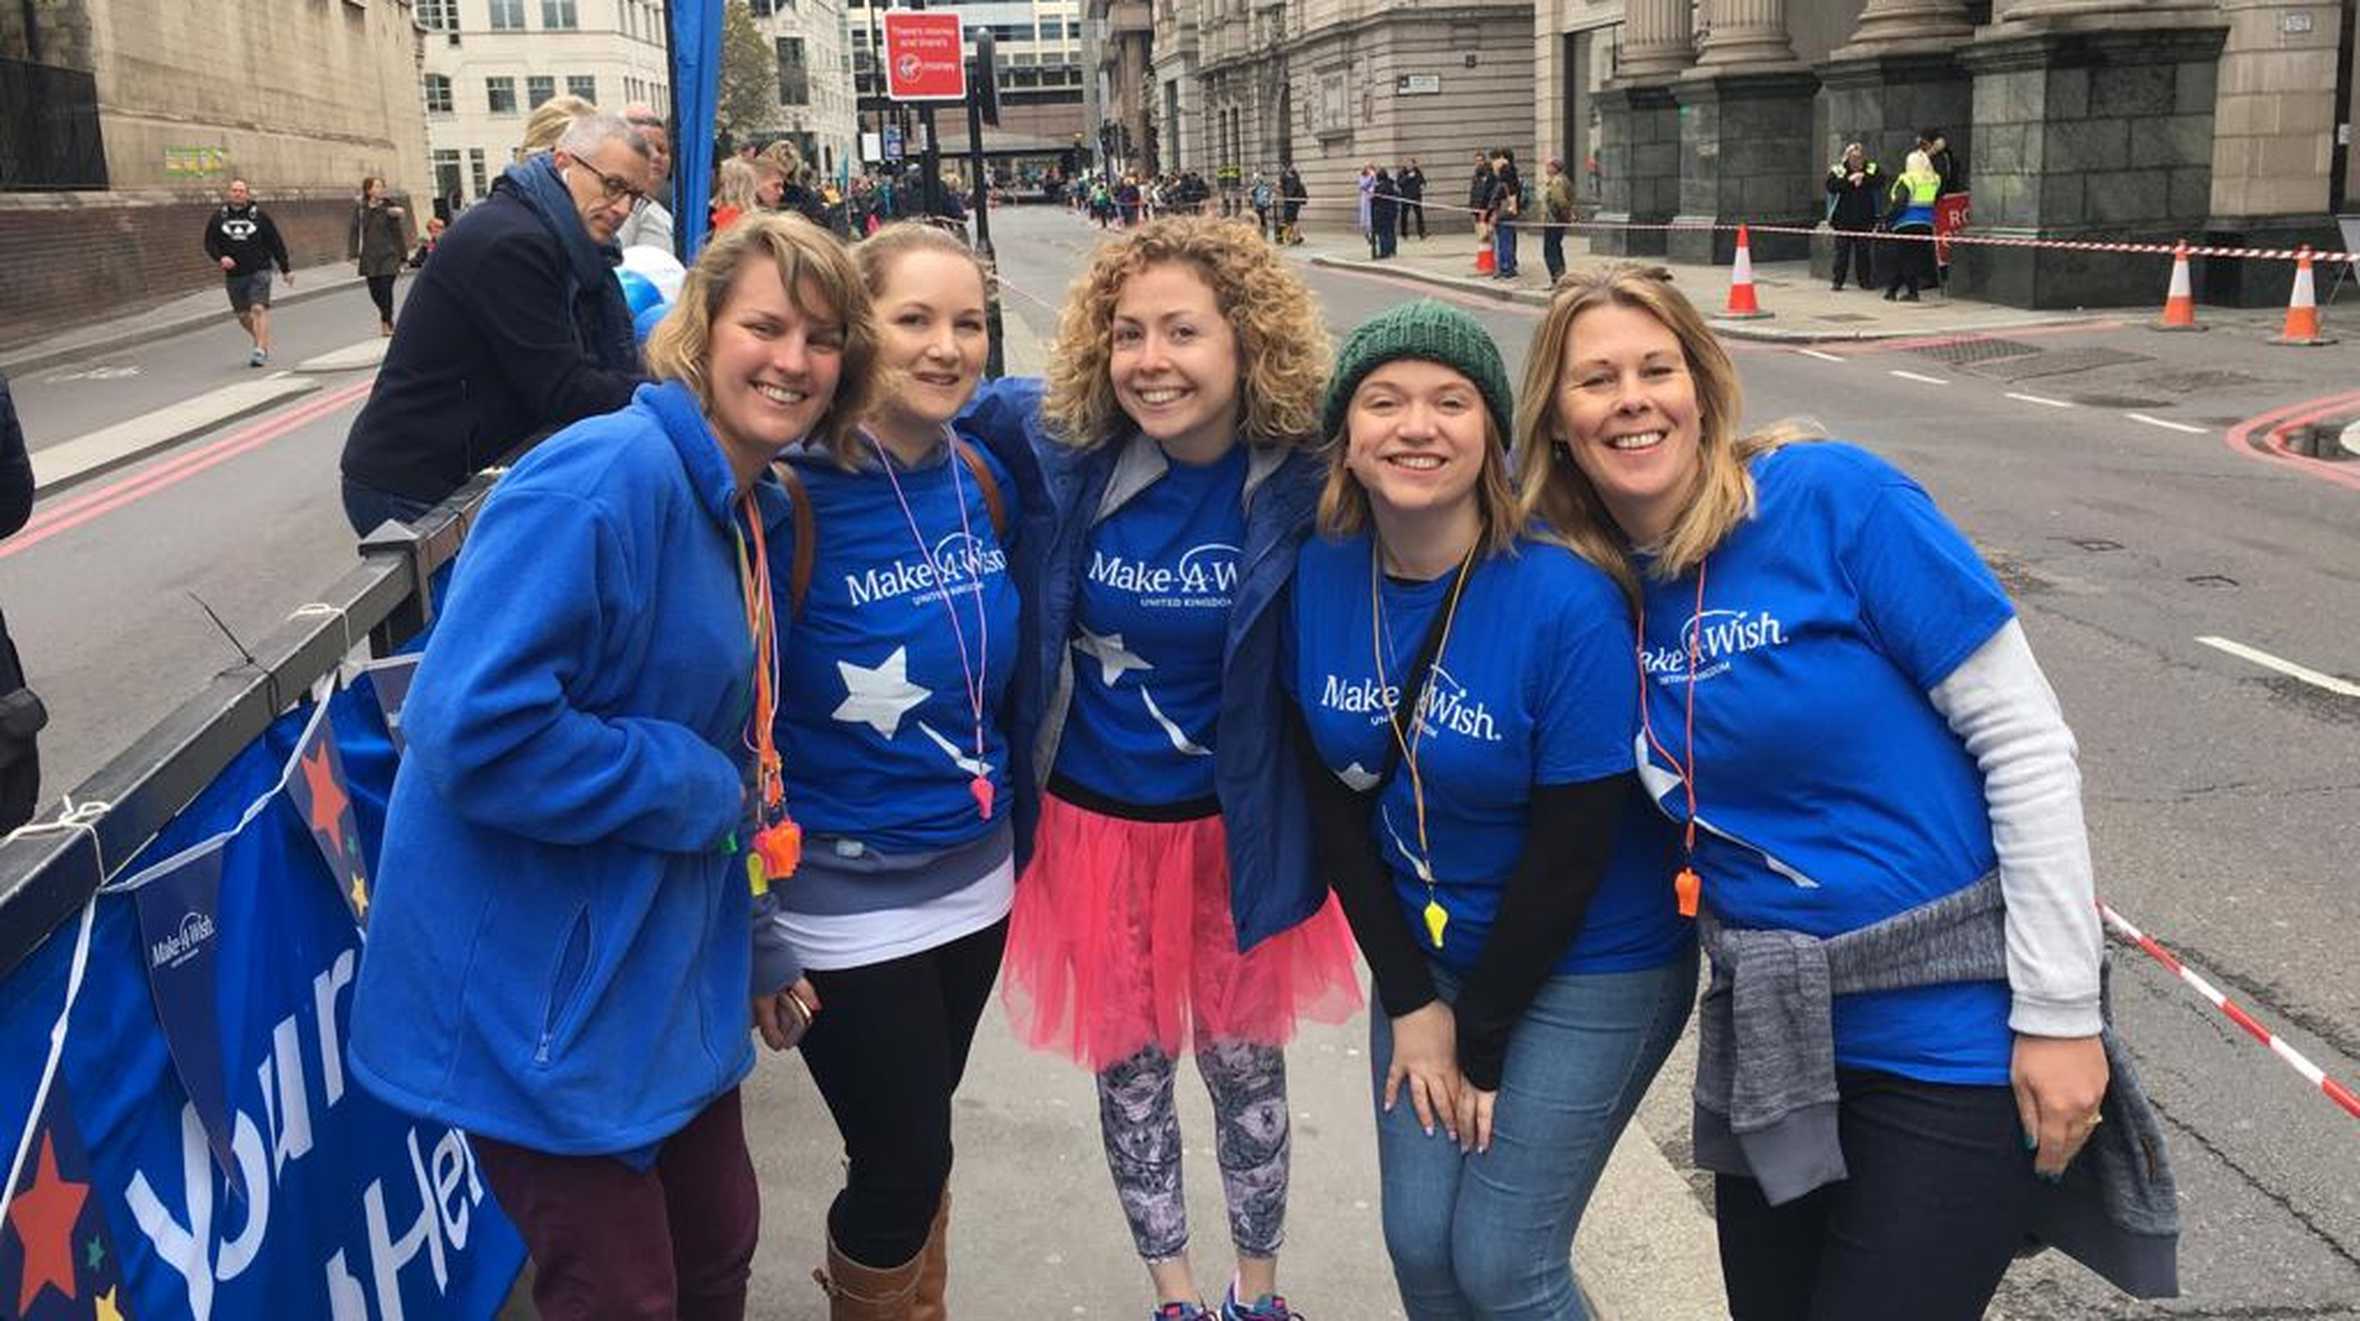 A group of cheerers in their blue Make-A-Wish t-shirts at the 2019 London Marathon.